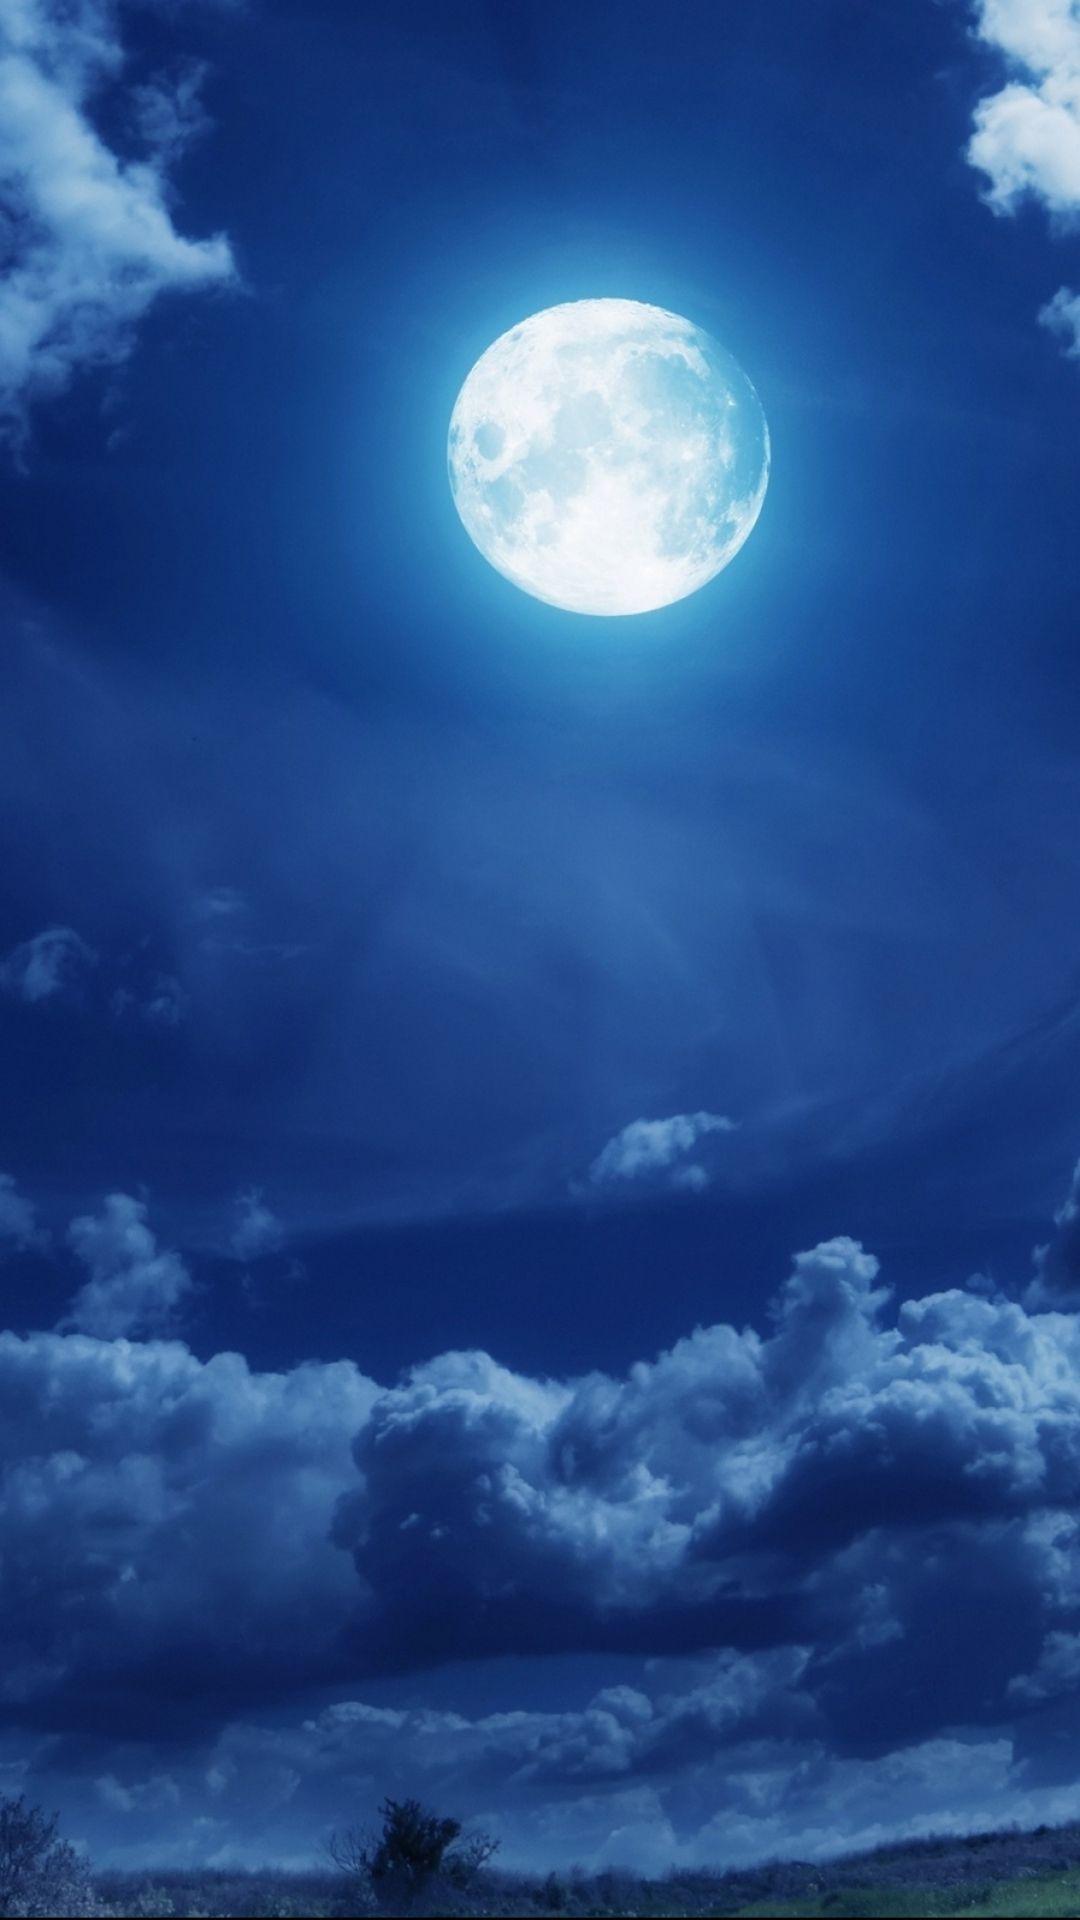 Blue Moon Wallpapers For Mobile - Wallpaper Cave